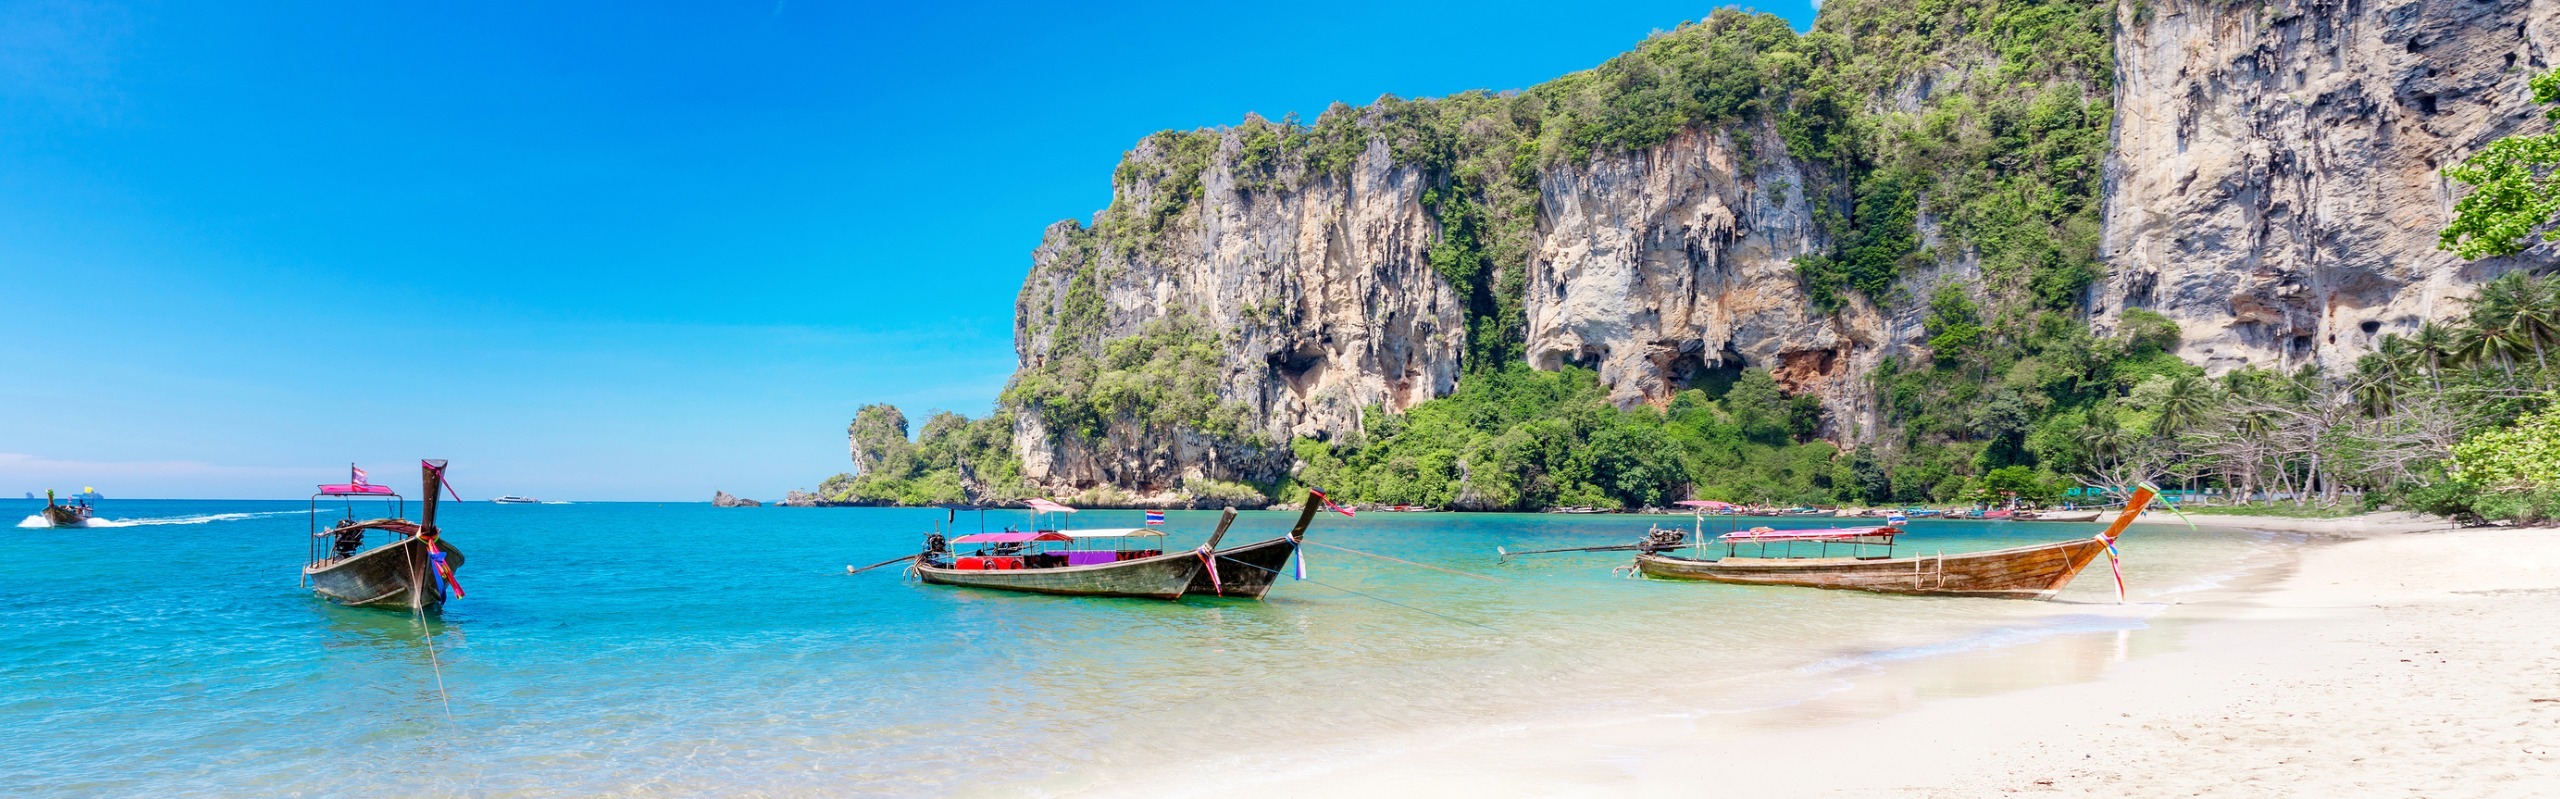 Best (and Worst) Times to Visit Krabi, When is Rainy Season